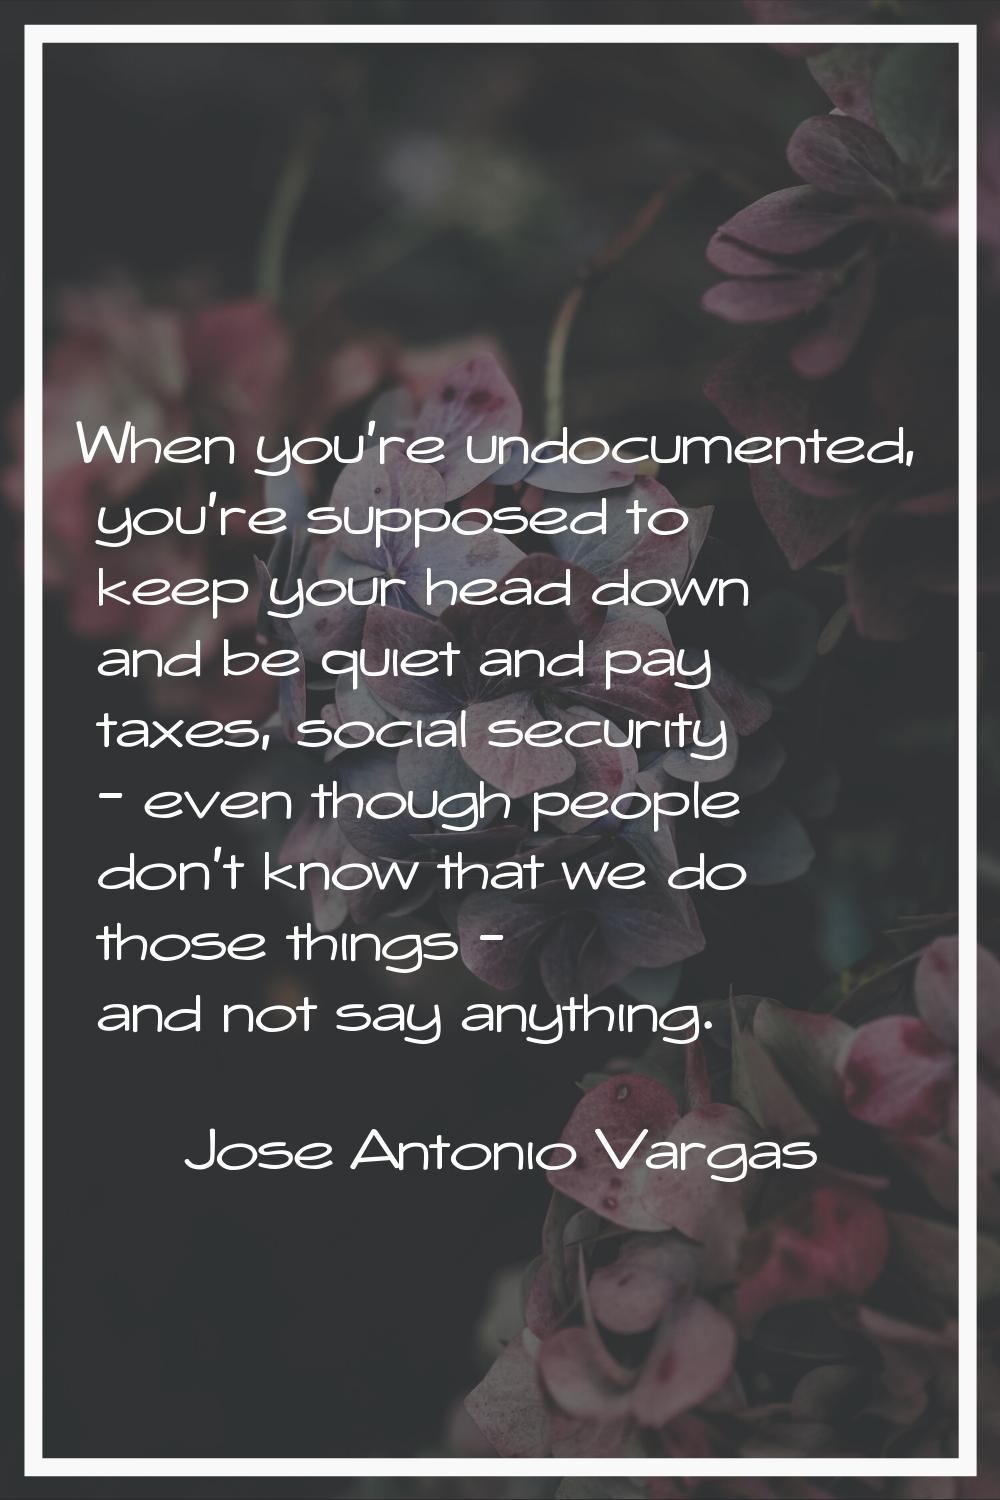 When you're undocumented, you're supposed to keep your head down and be quiet and pay taxes, social